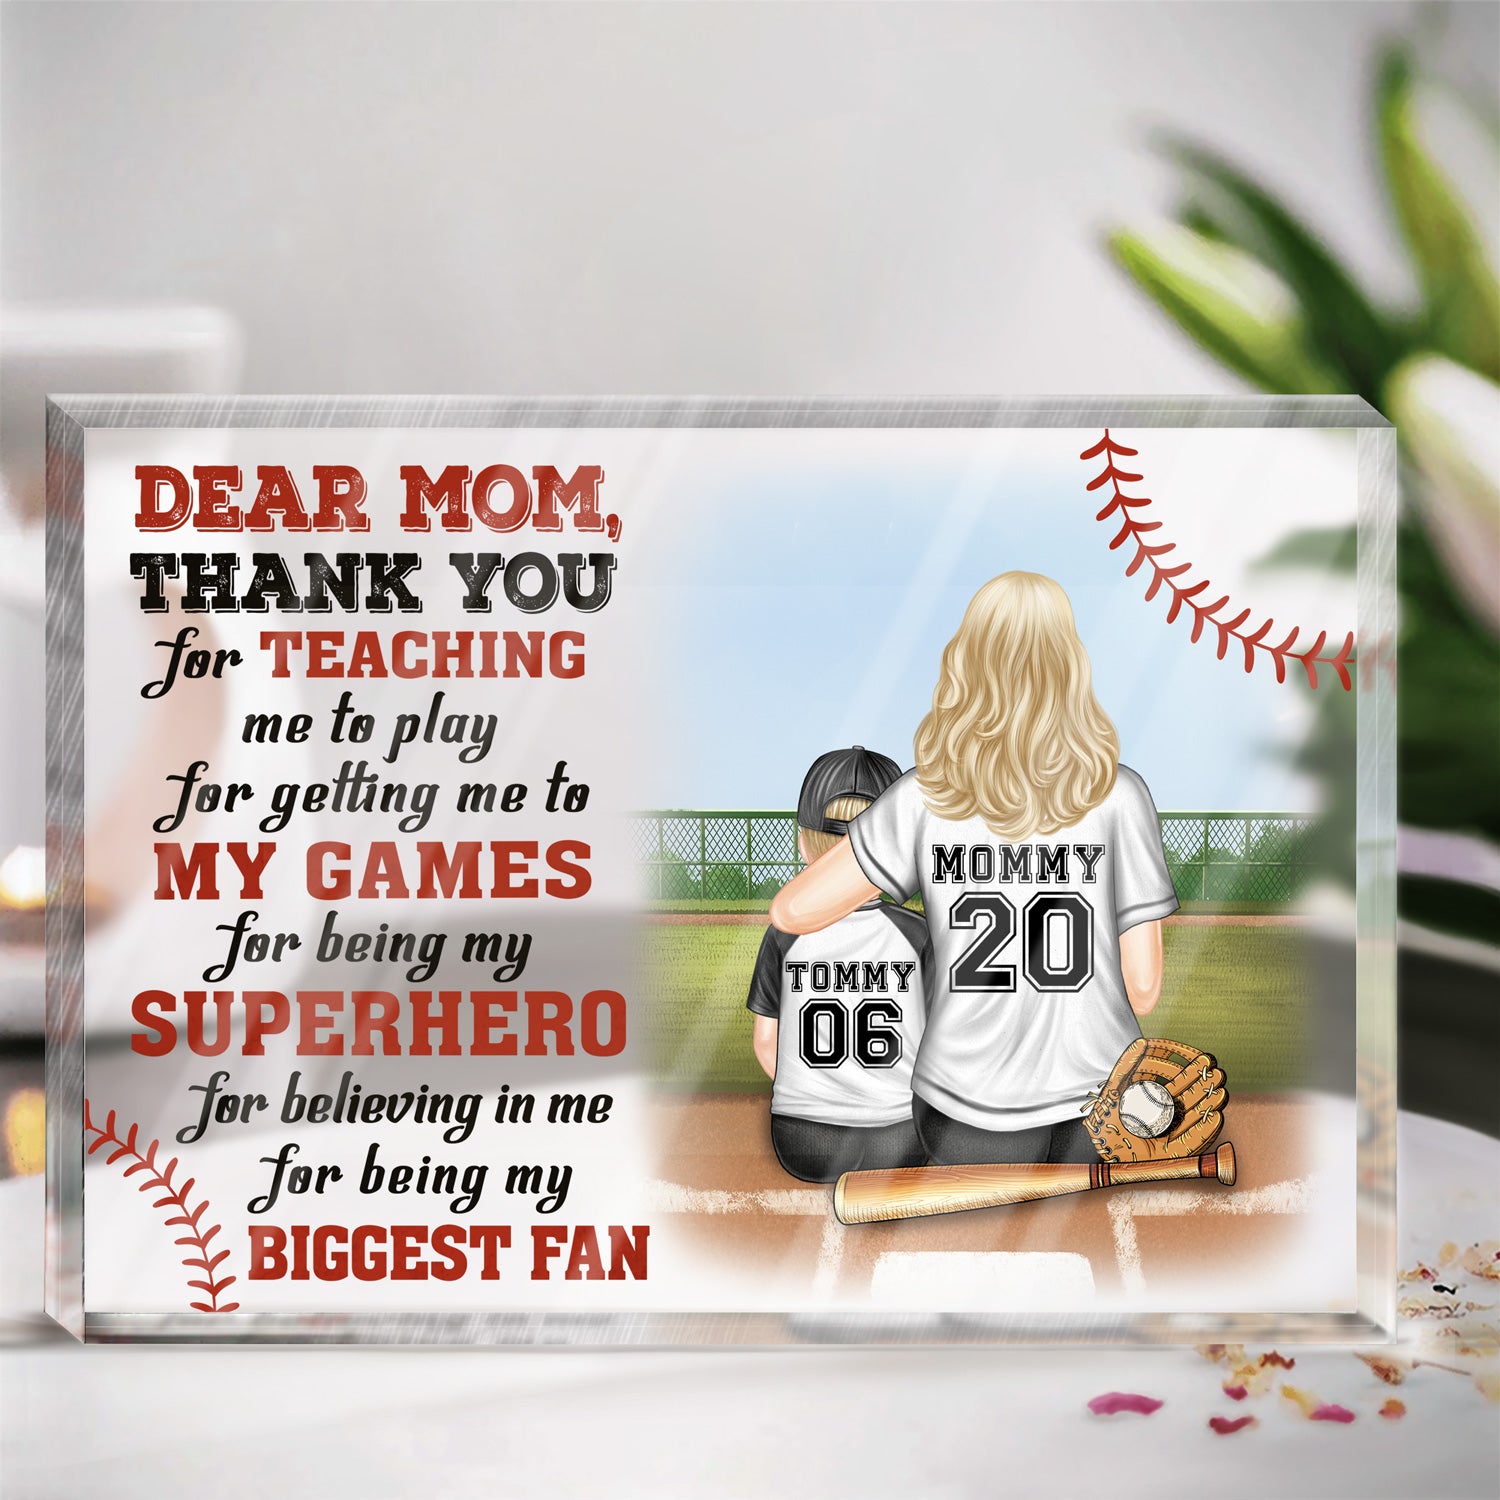 Dear Mom Thank You For Teaching Me - Birthday, Loving Gift For Baseball, Softball Fan, Mom, Mother - Personalized Rectangle Shaped Acrylic Plaque